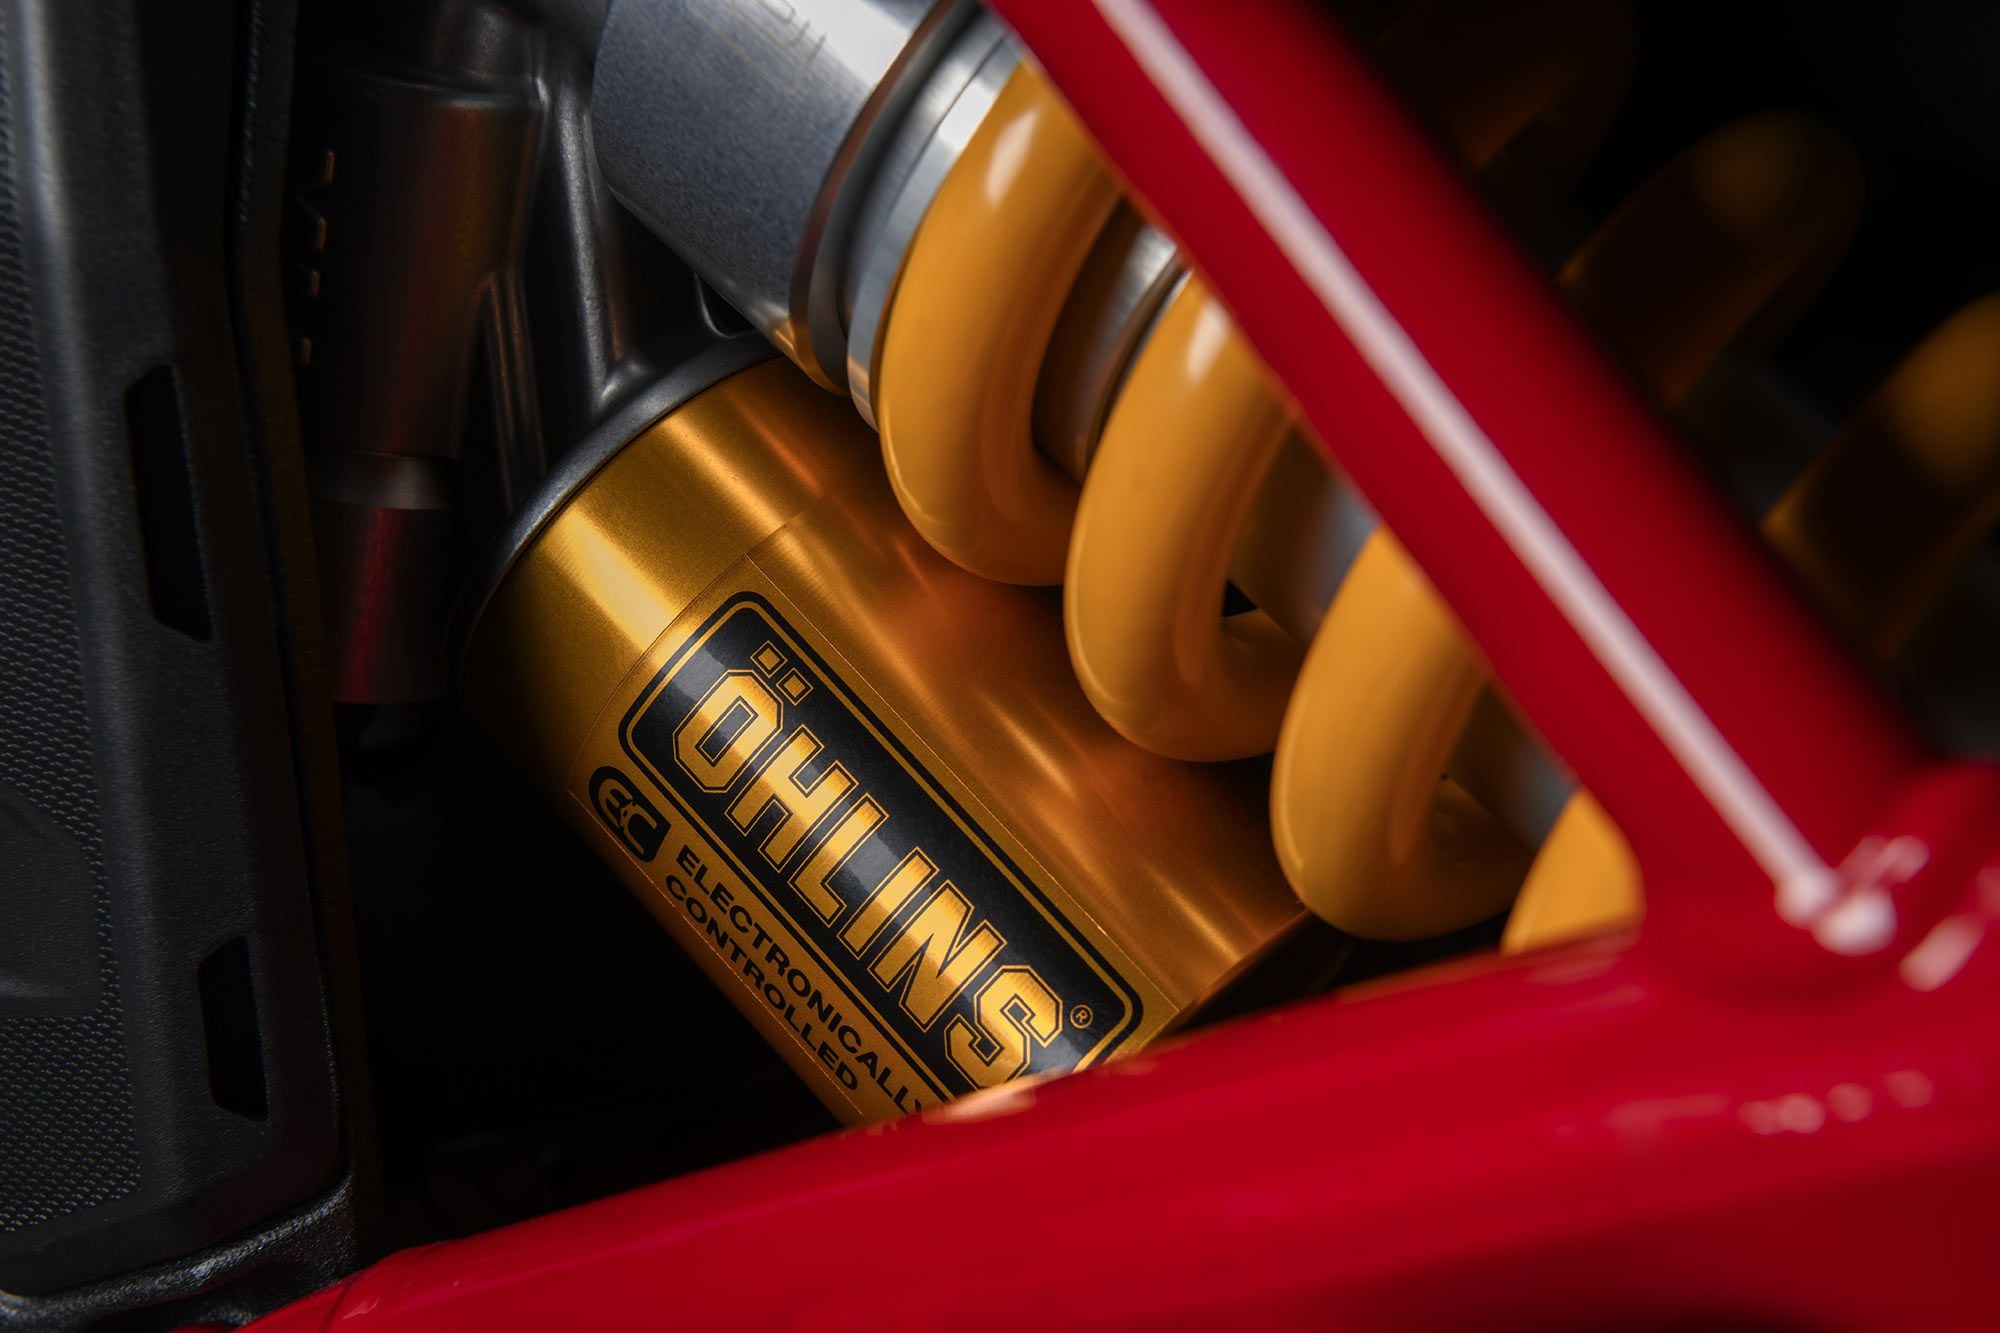 The Pikes Peak model gets Öhlins Smart EC 2.0 suspension front and rear, which should significantly improve handling.